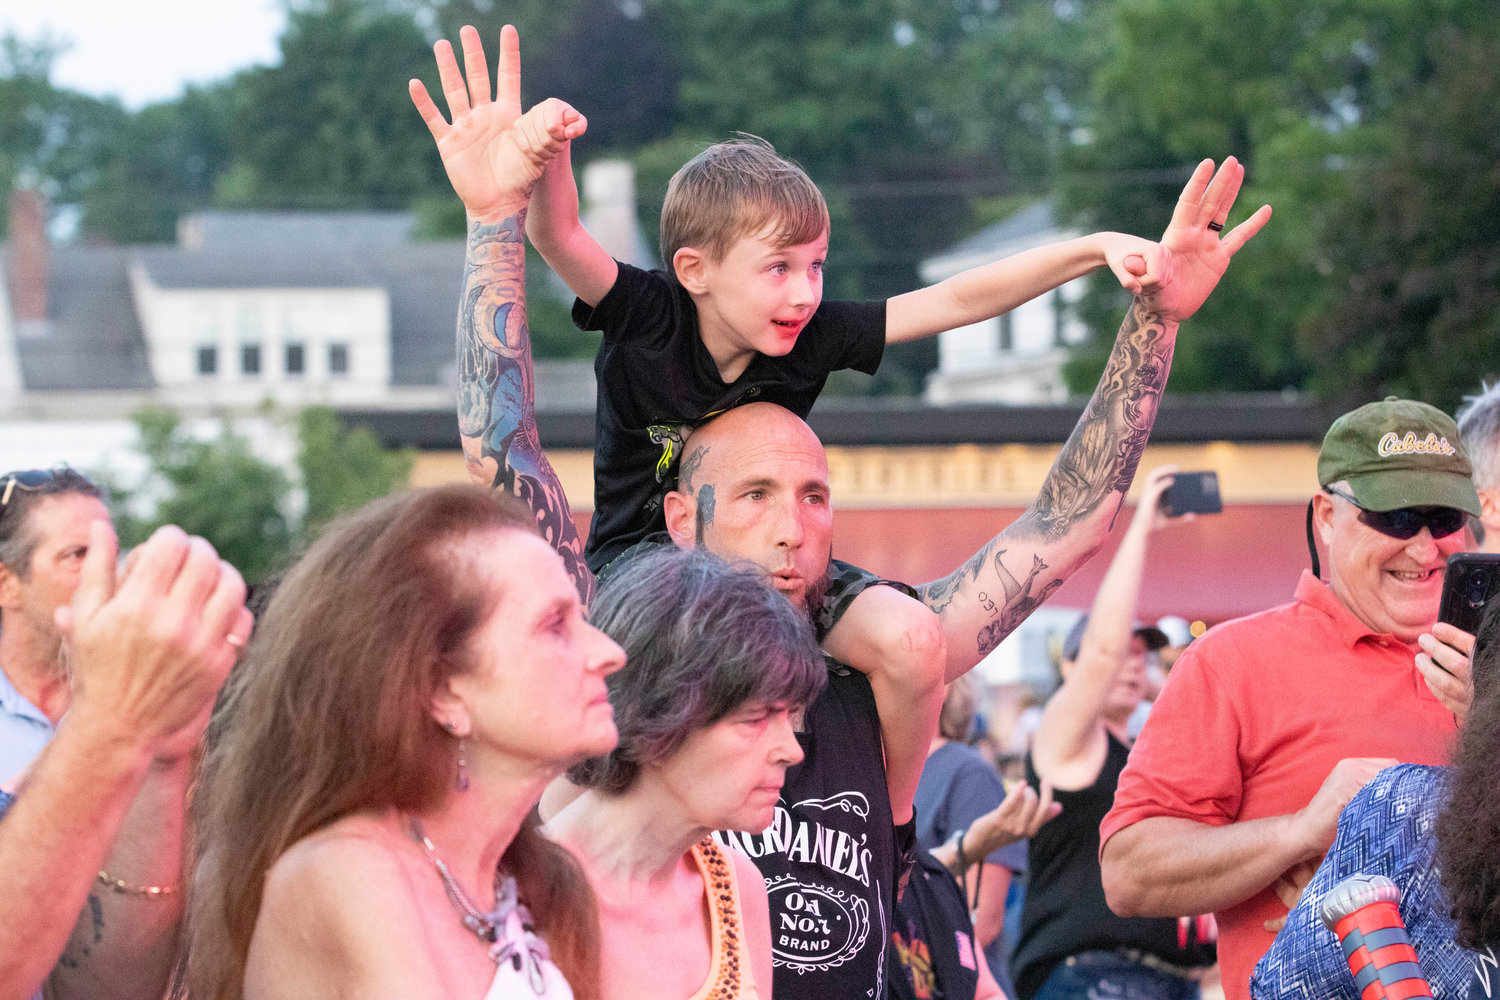 Matthew Oliveira (middle) and son, Leo (top) cheer on the band.